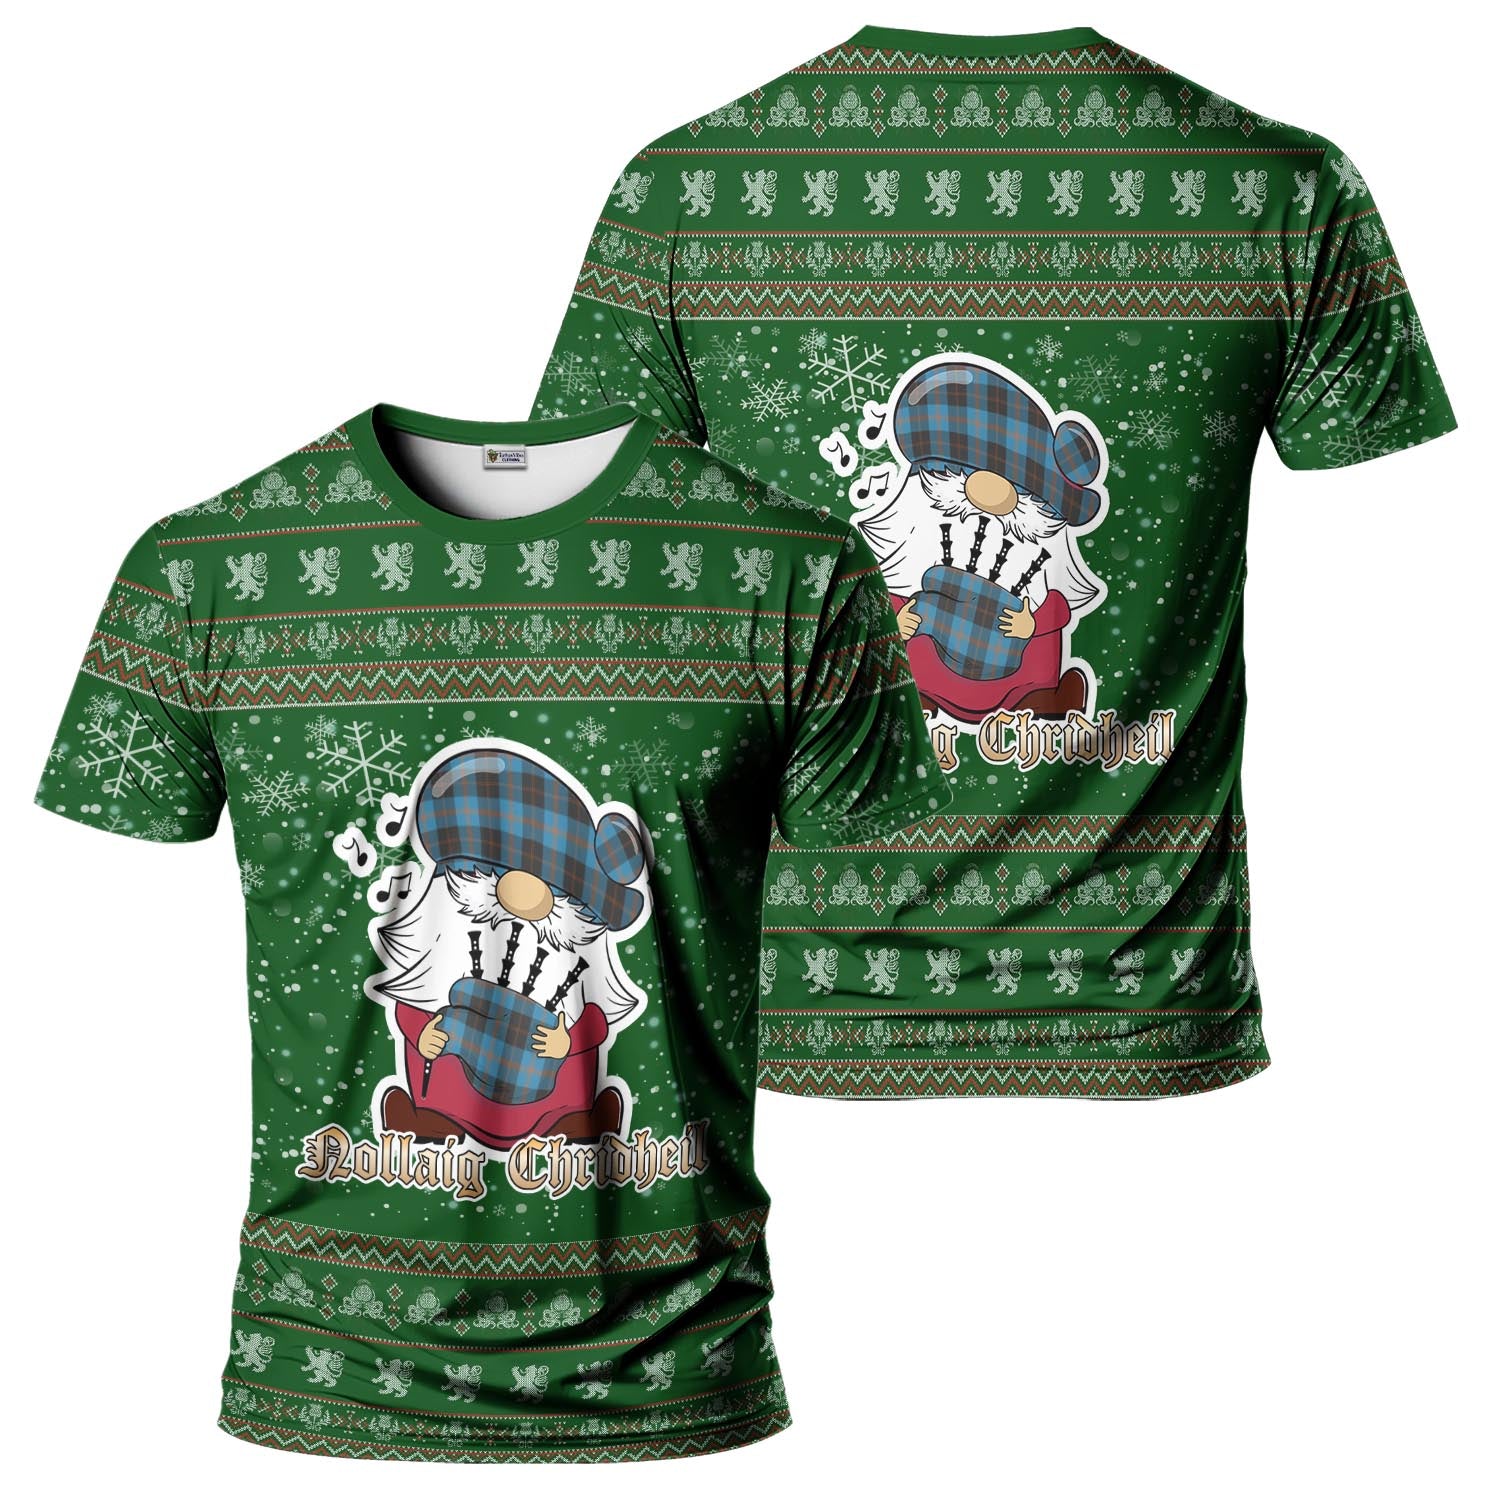 Garden Clan Christmas Family T-Shirt with Funny Gnome Playing Bagpipes Men's Shirt Green - Tartanvibesclothing